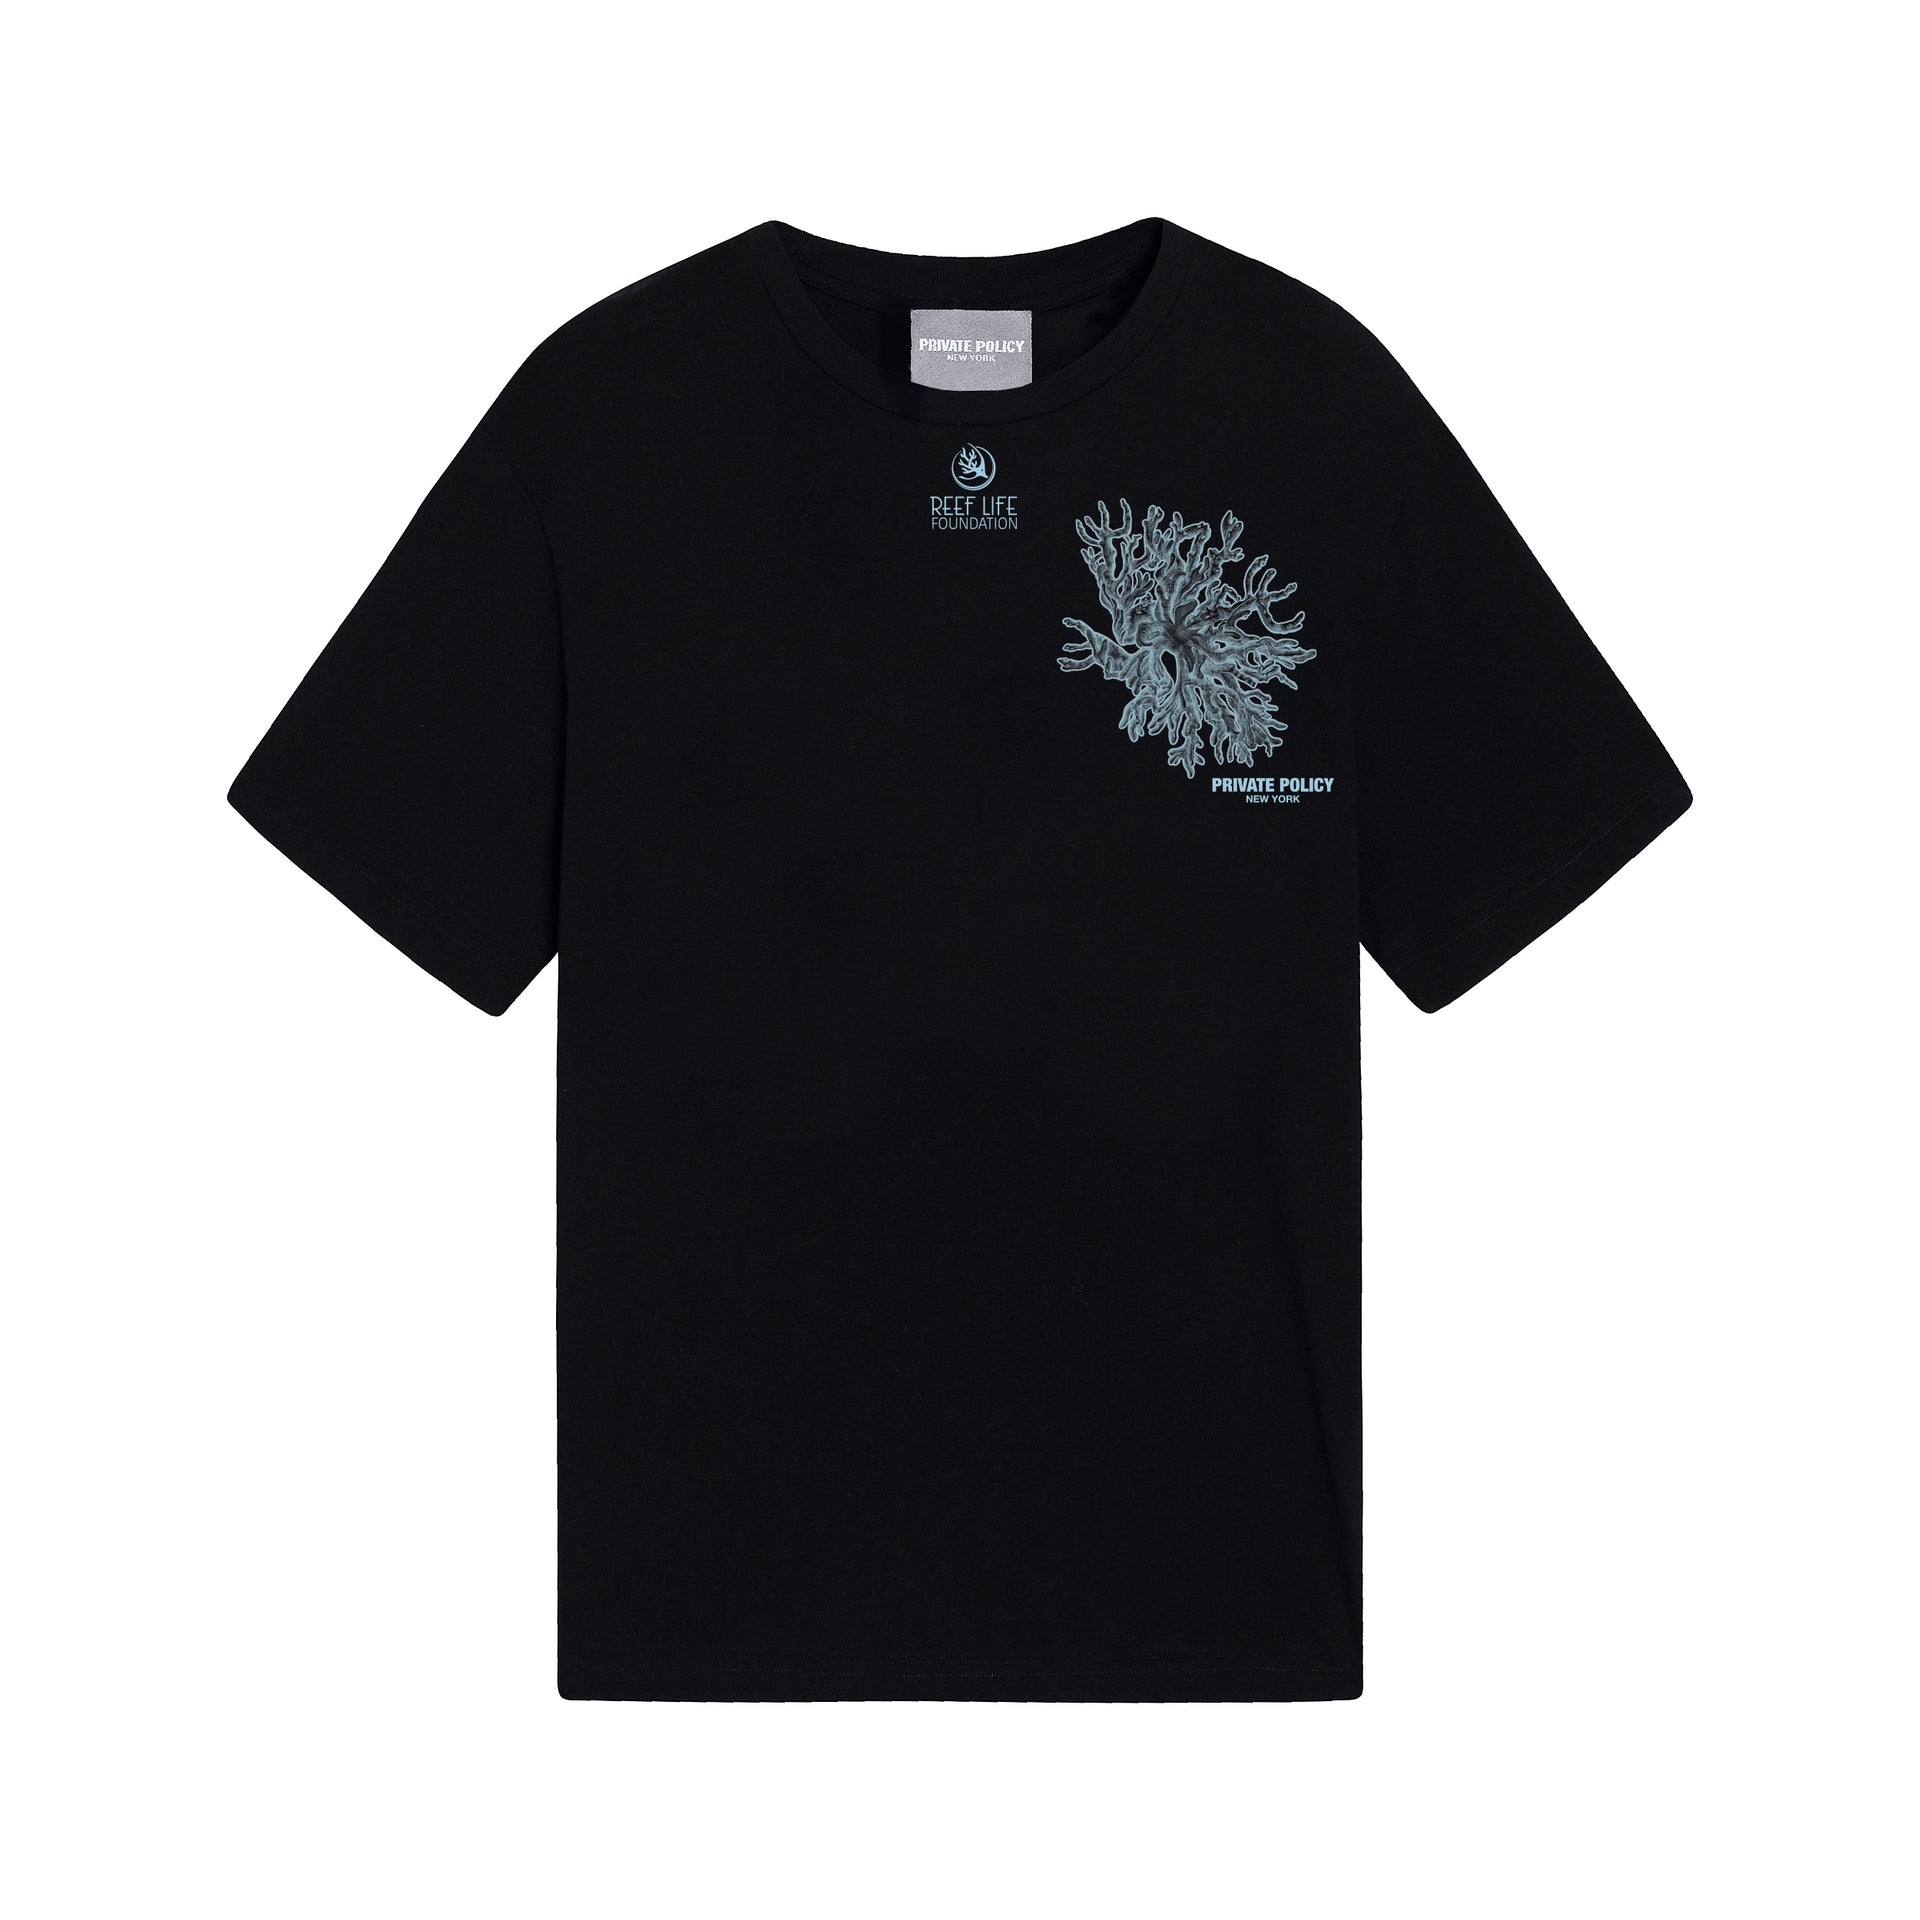 Reef Life Foundation x PRIVATE POLICY Collaboration T-shirt